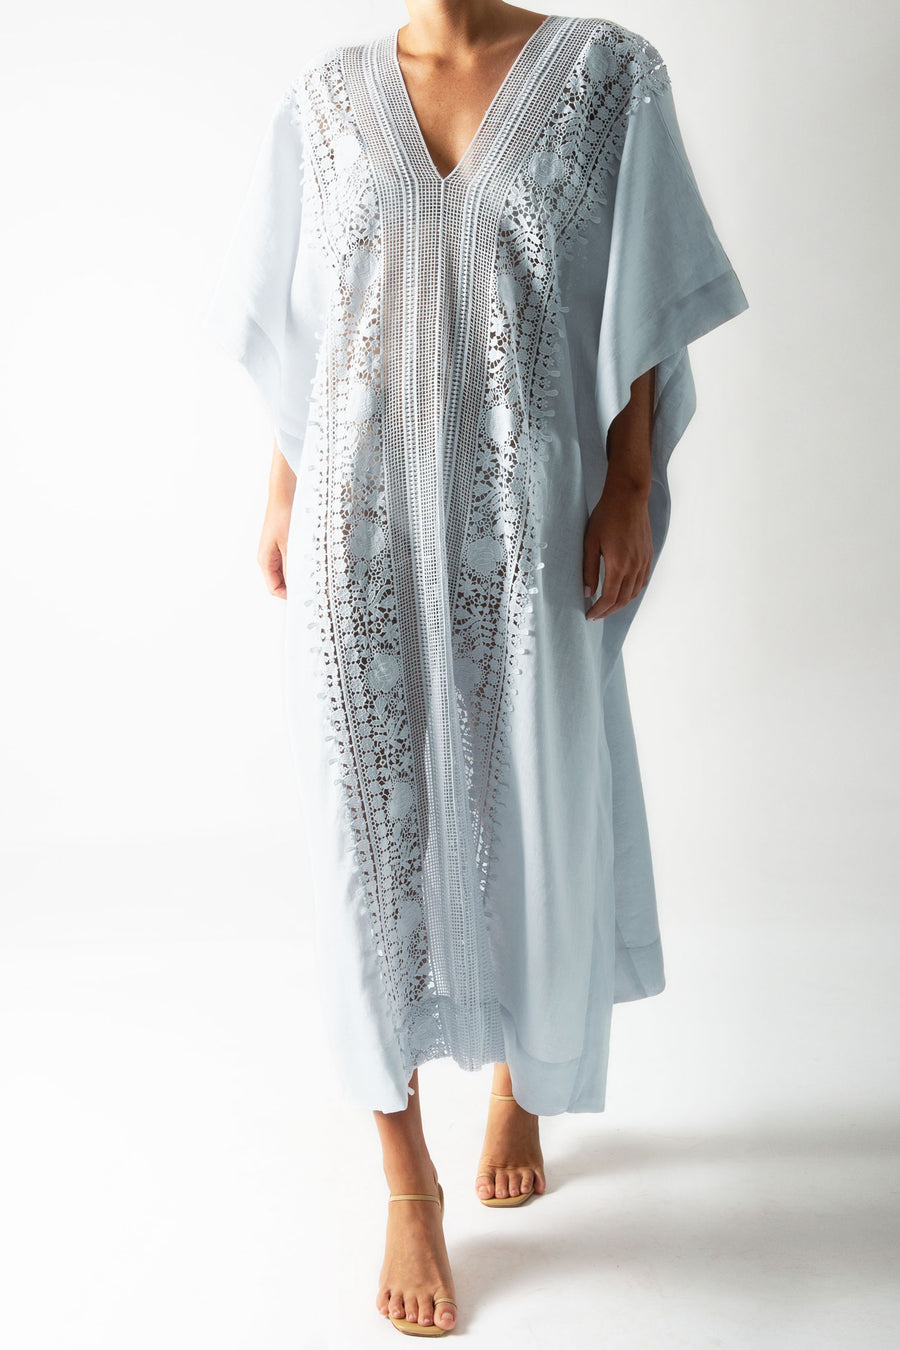 This is a photo of a woman wearing a light blue linen caftan with lace trim down the center.